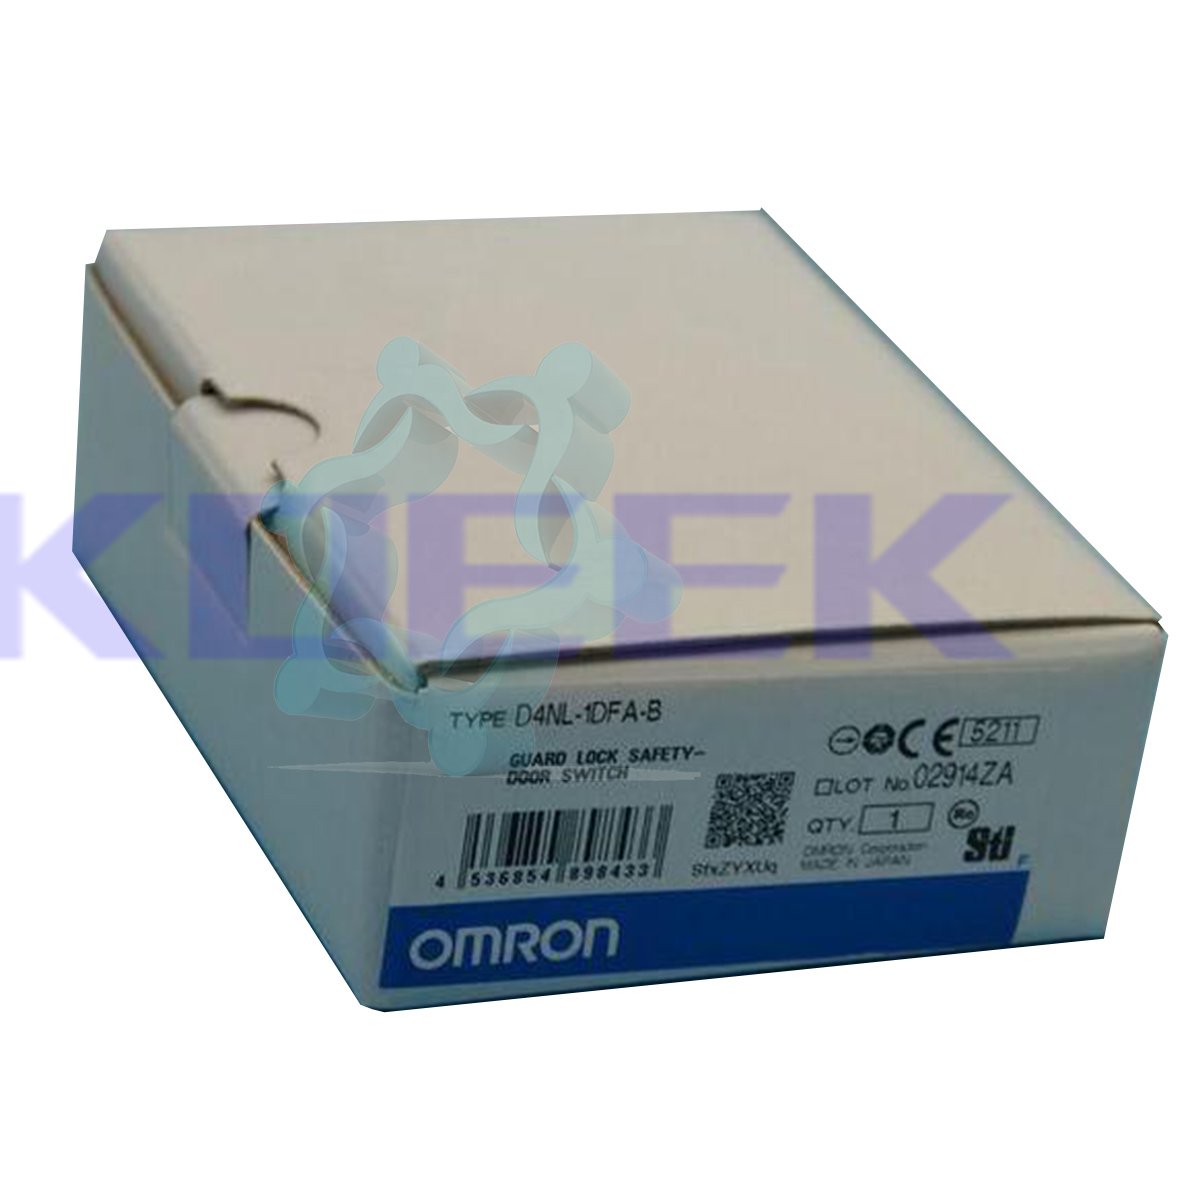 D4NL-1DFA-B KOEED 101-200, 80%, import_2020_10_10_031751, Omron, Other